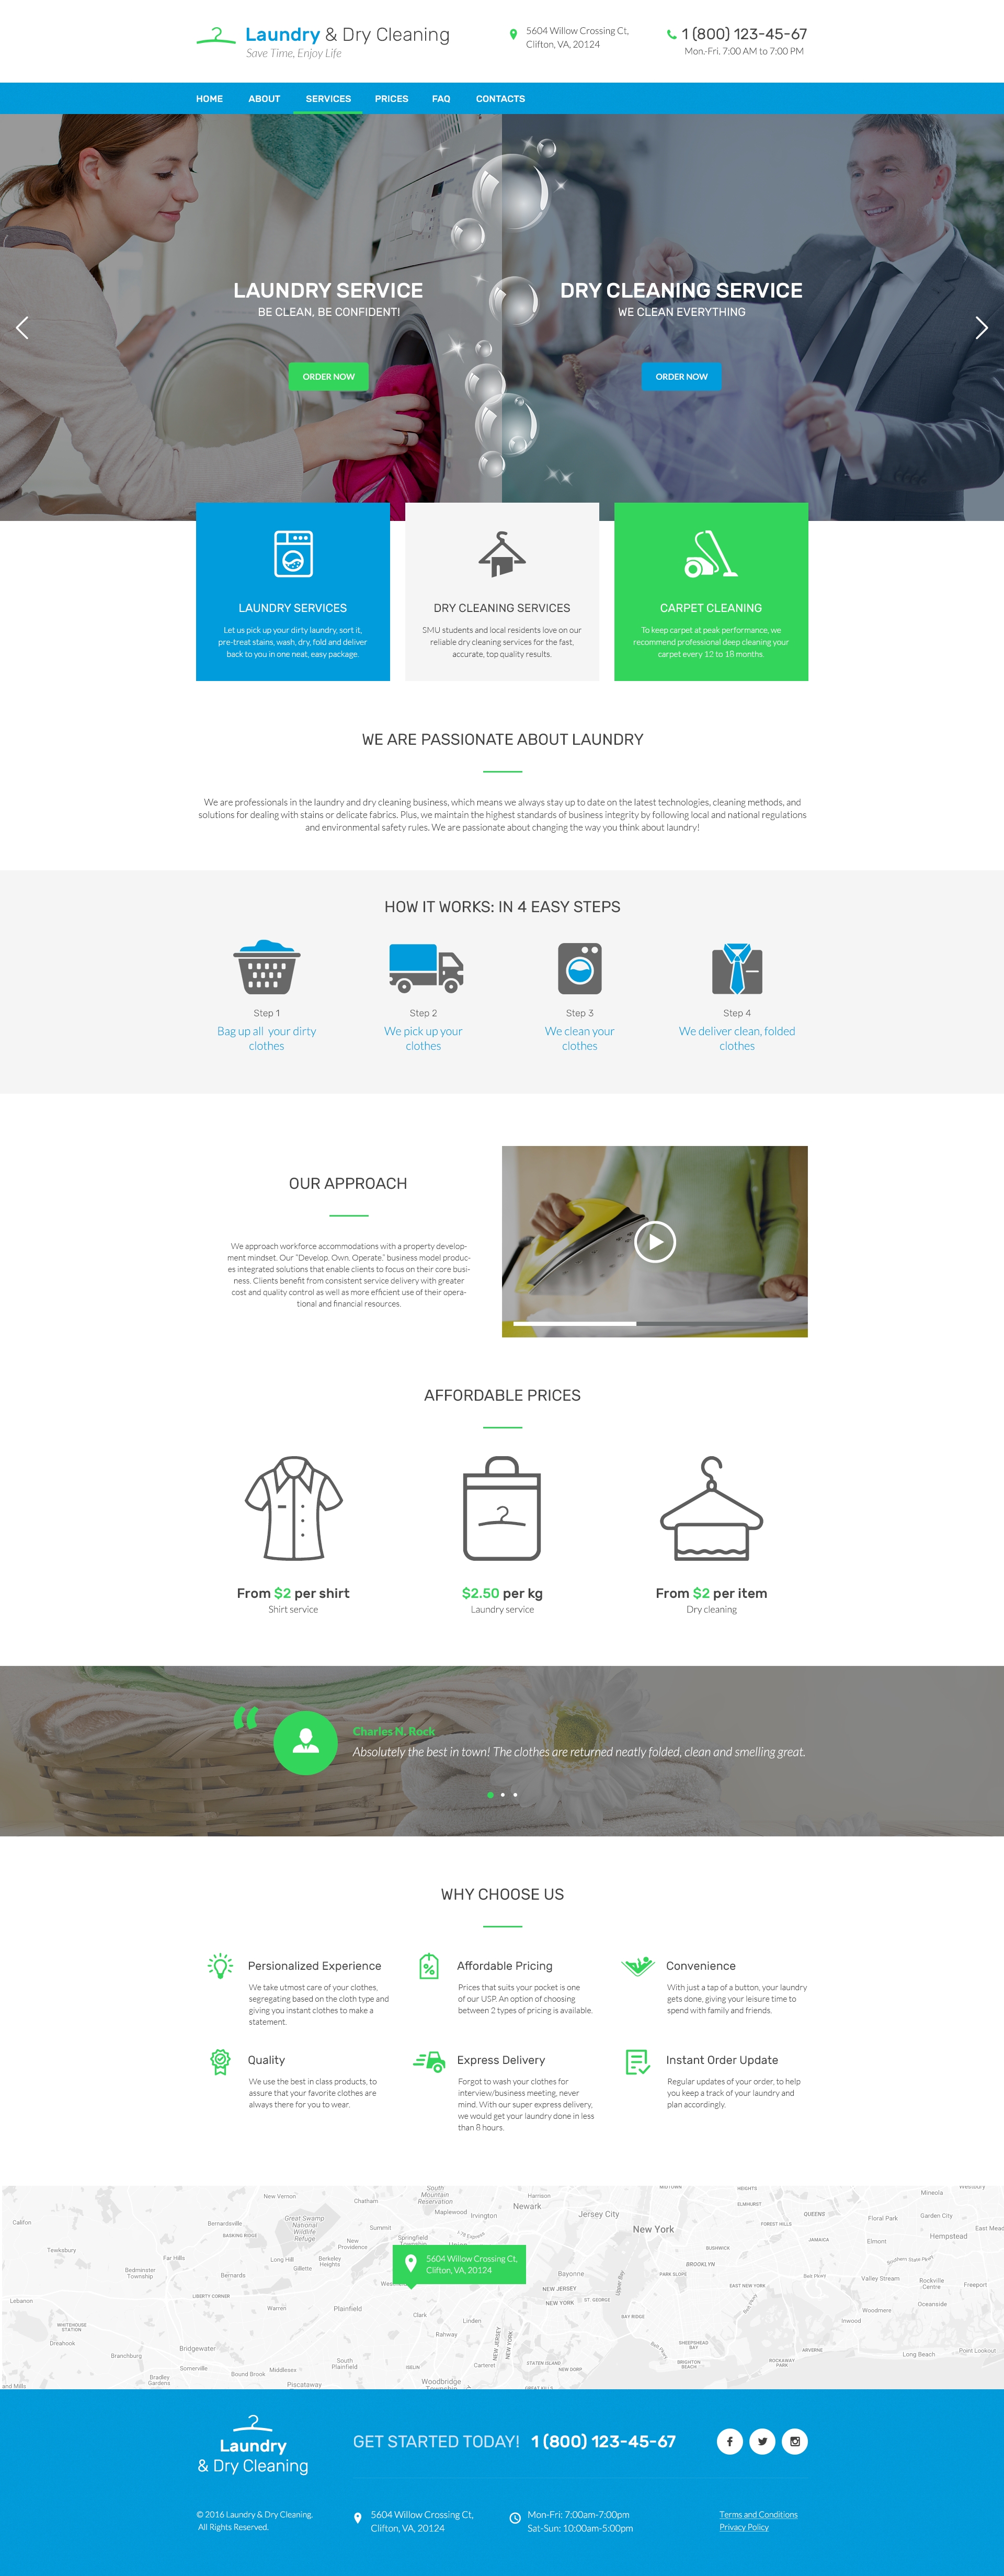 Home Page preview for Laundry Dry Cleaning Services free PSD website template